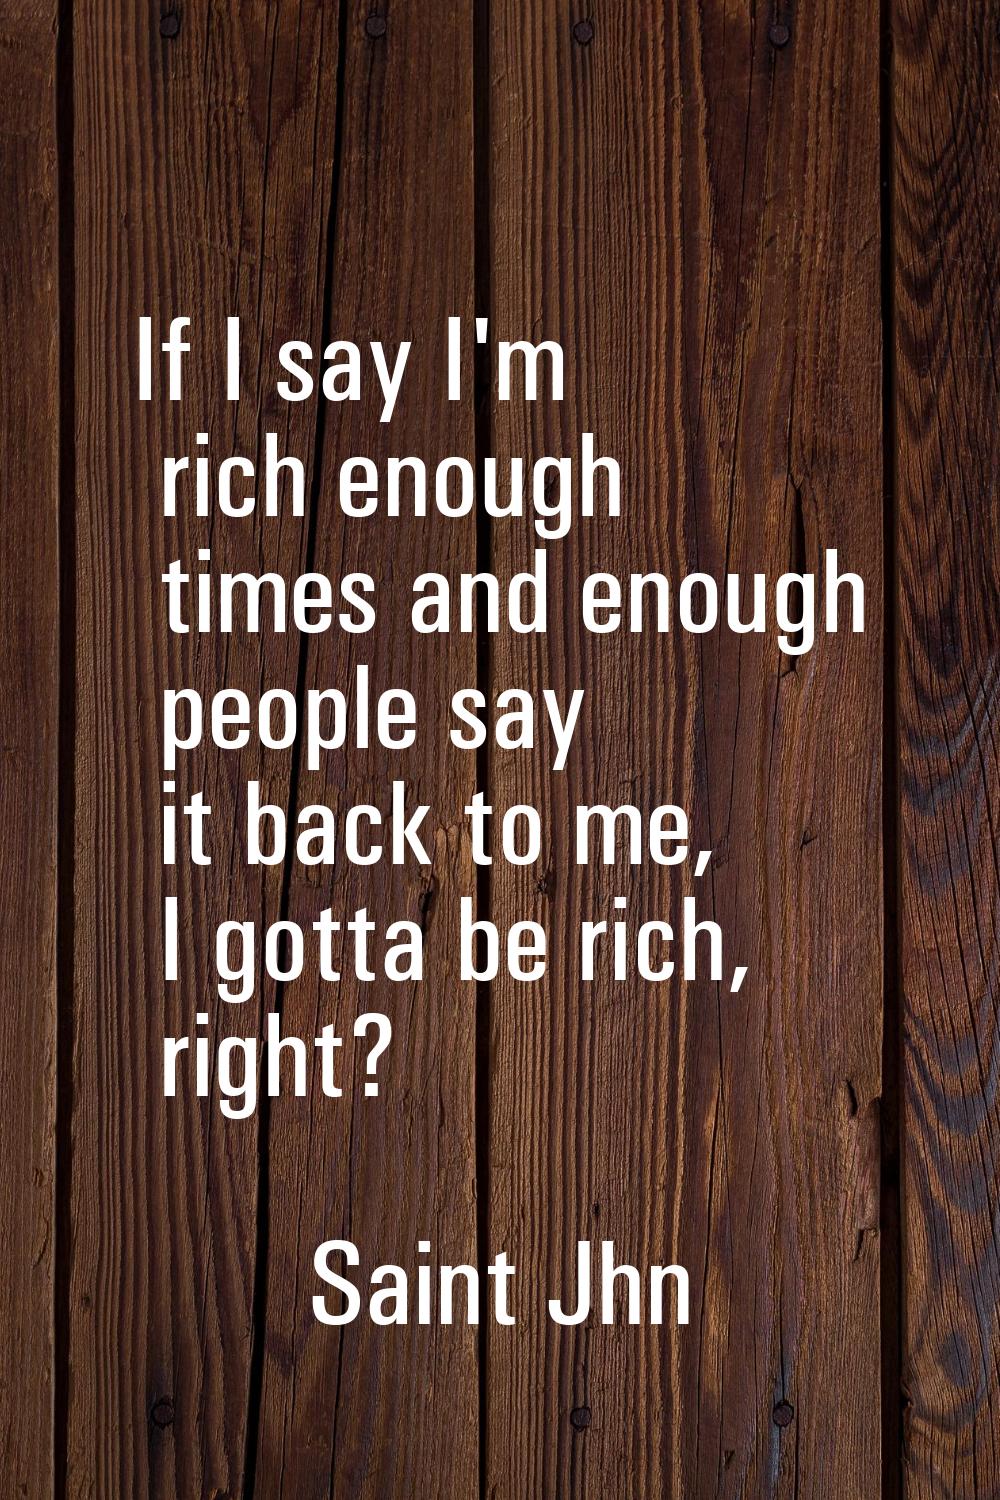 If I say I'm rich enough times and enough people say it back to me, I gotta be rich, right?